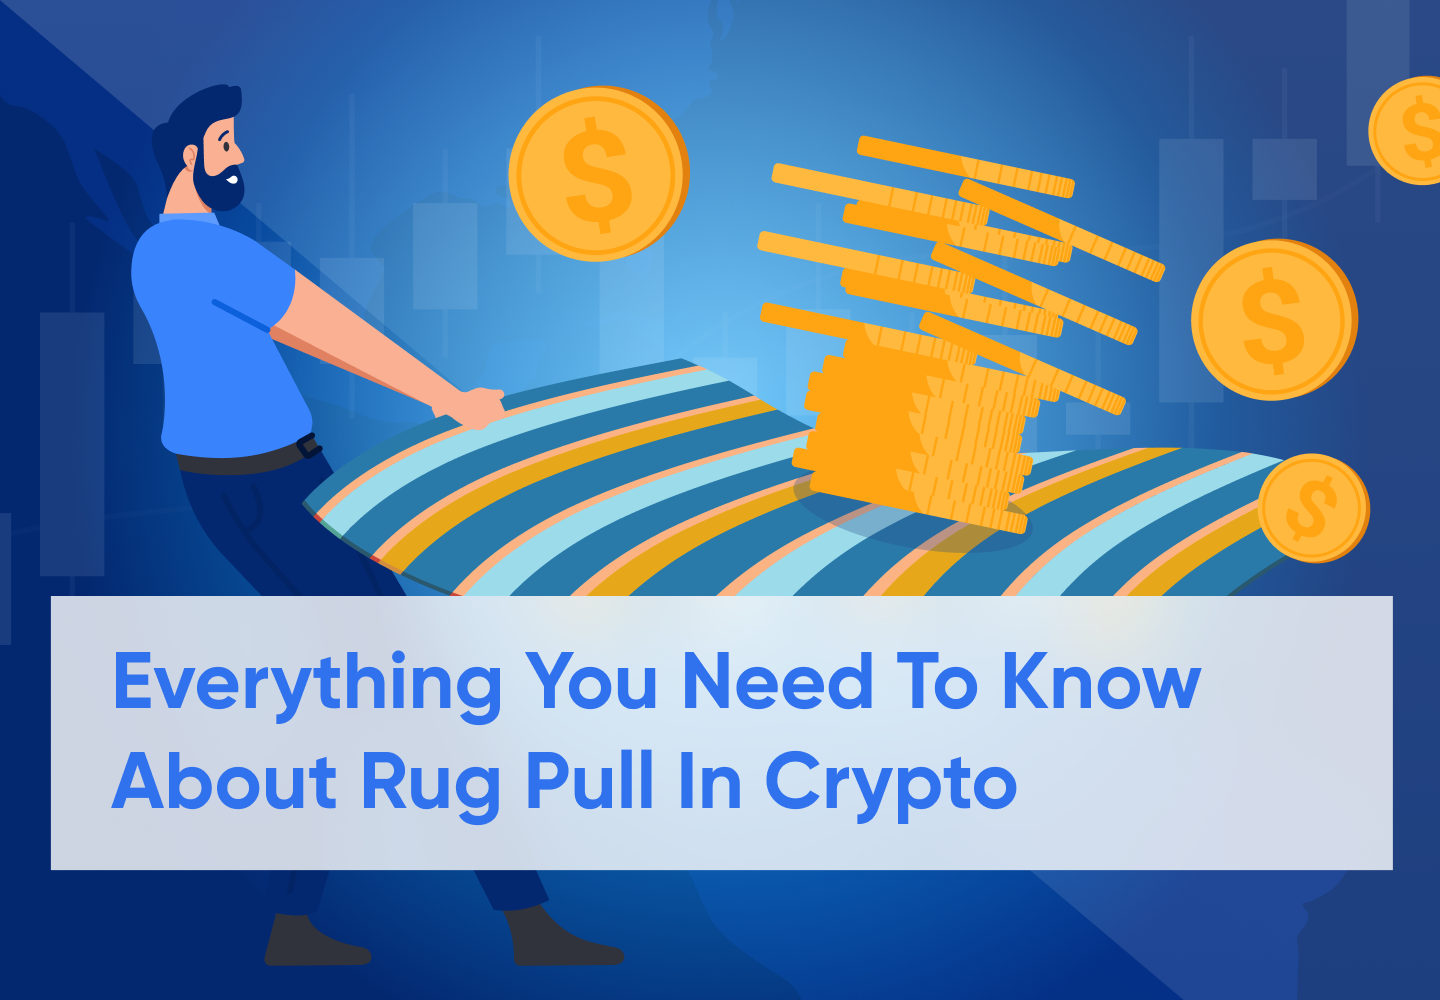 What Is a Rug Pull In Crypto